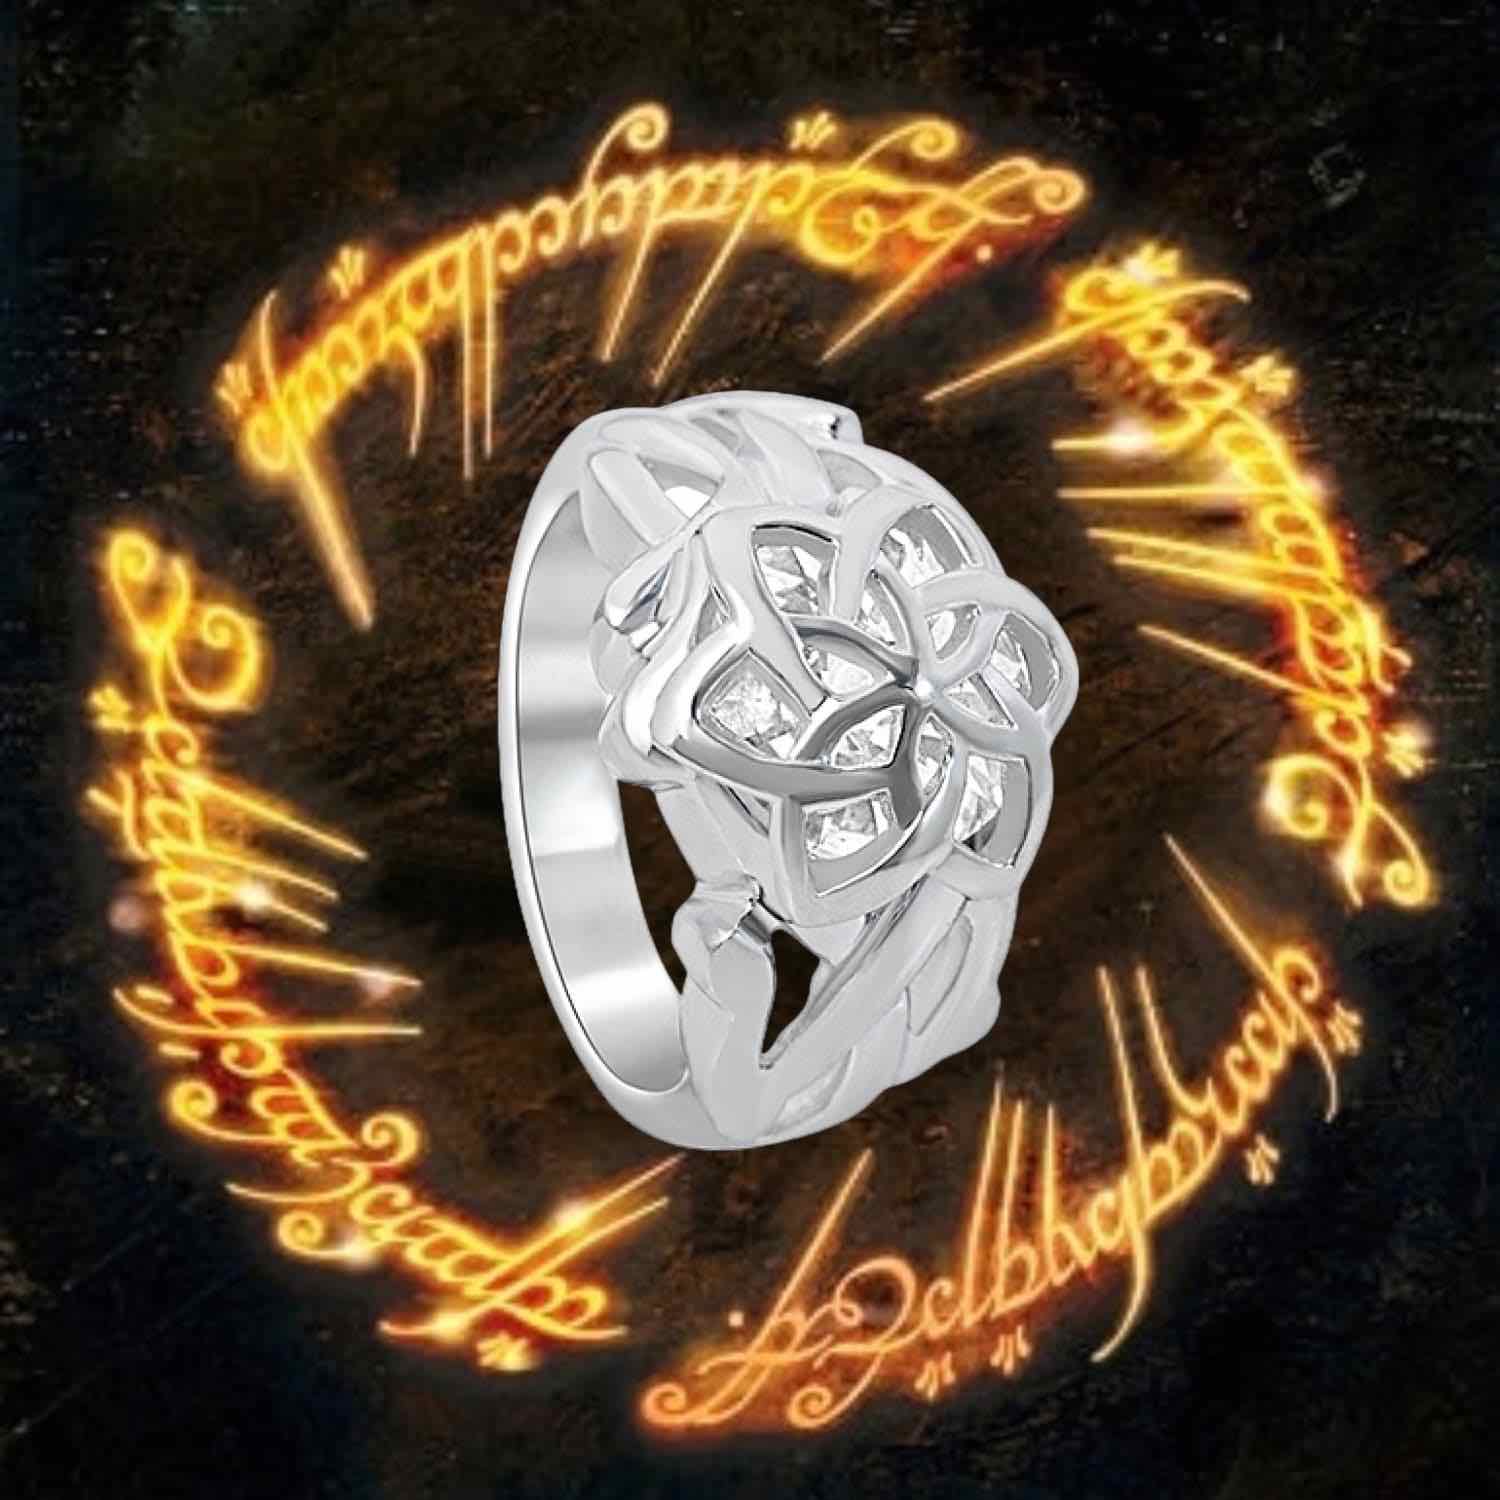 Shop the official Galadriel's Nenya White Gold Ring of Adamant from Lord of the Rings. This stunning piece of jewelry is crafted from solid white gold and features a sparkling cubic zirconia stone. Wear it as a symbol of your love for the fantasy world